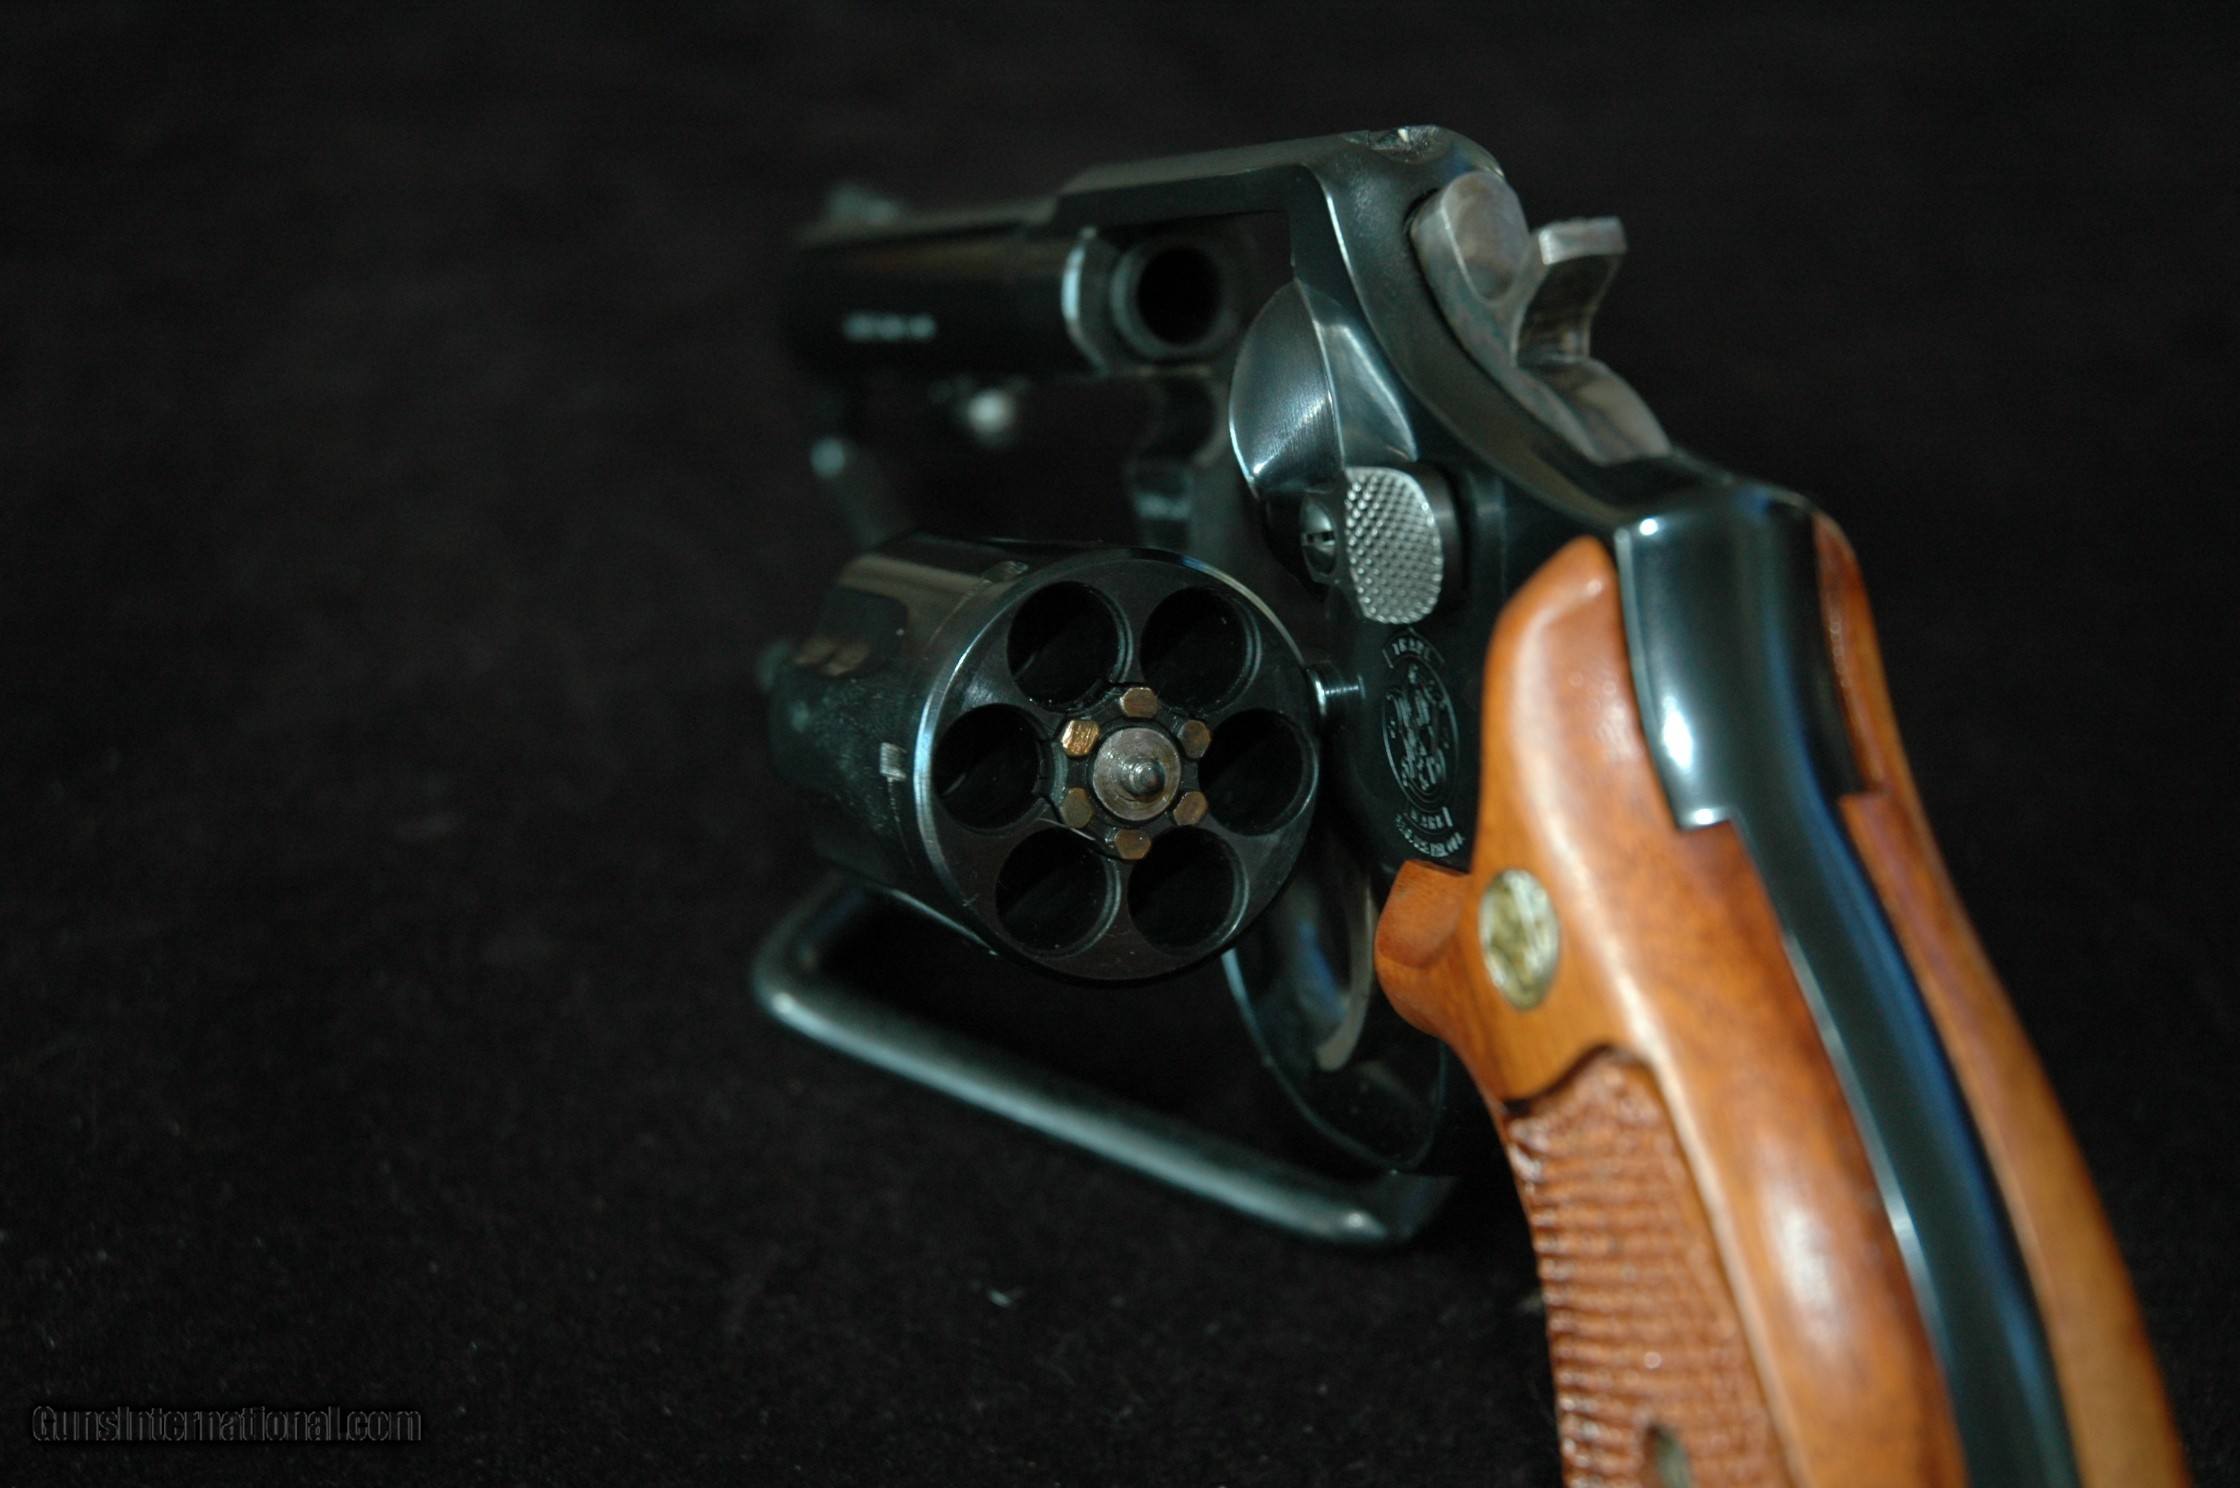 Very Rare Smith and Wesson 547 9mm Revolver Vintage